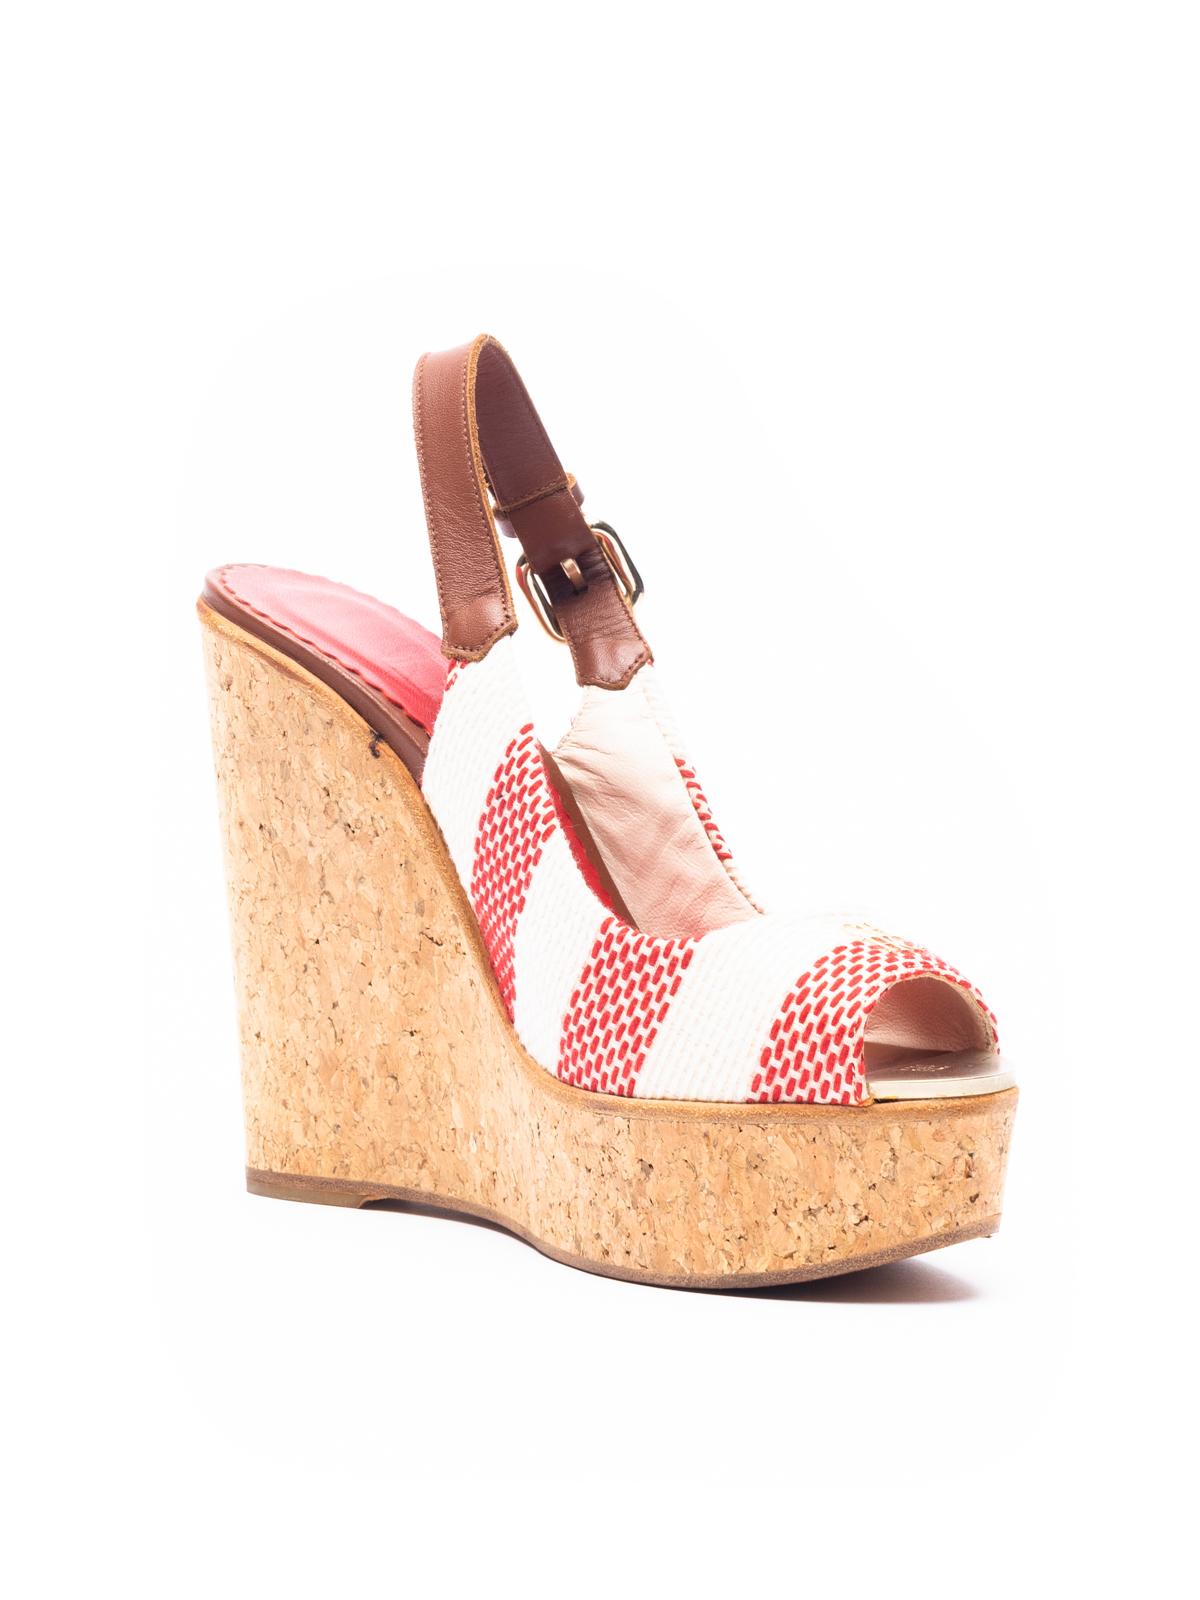 CONDITION is good. There is minor wear to the inner and outer soles, as well as light wear ot the canvas exterior. Details Red and Cream Cork wedge Slingback and adjustable buckle Composition Canvas, leather and cork Fitting Information Fits true to